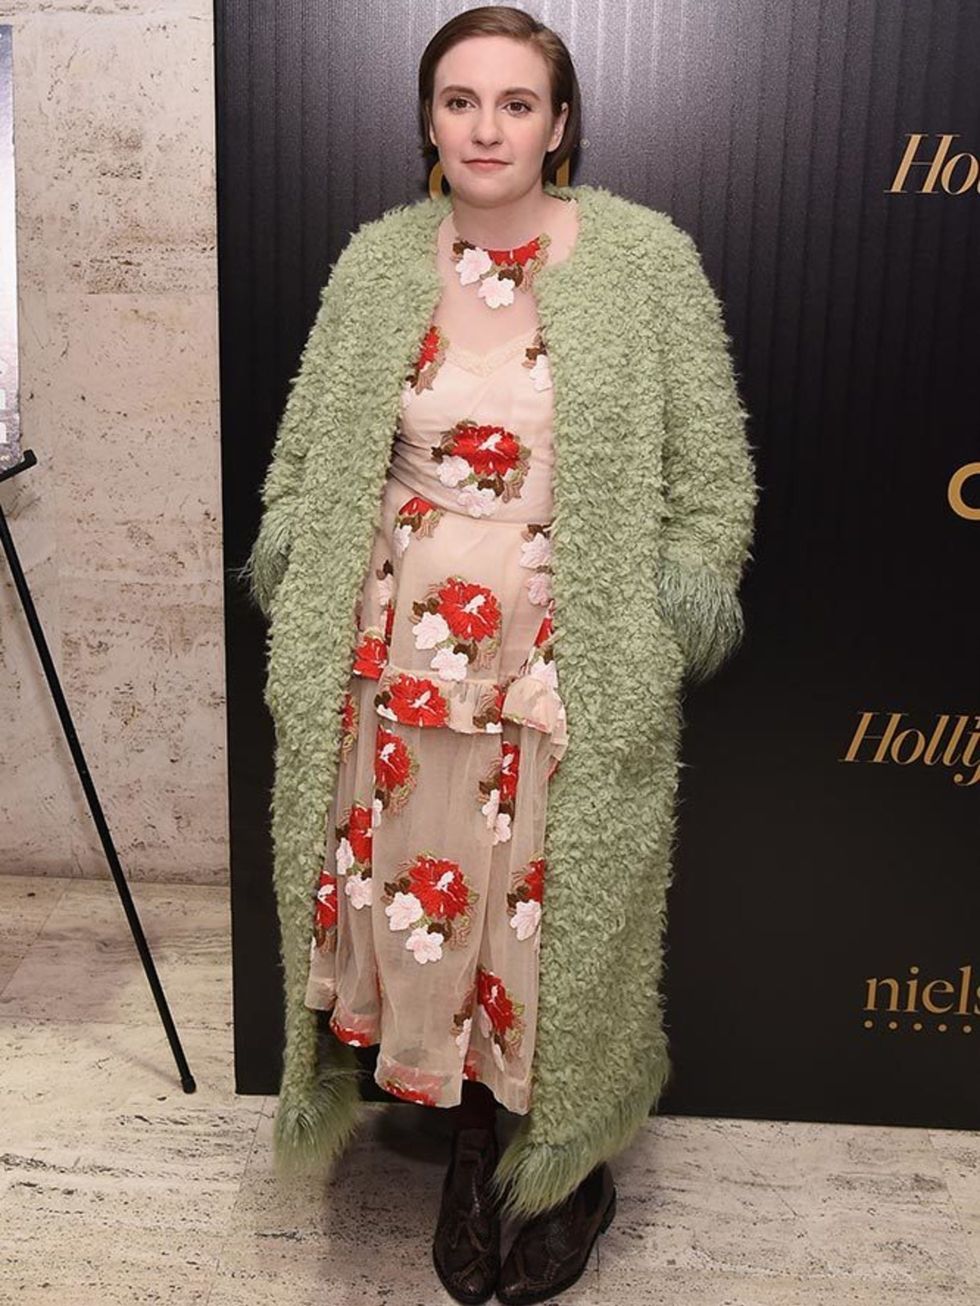 Lena Dunham attends the Hollywood Reporter's 2016 35 Most Powerful People in Media at Four Seasons Restaurant in New York, April 2016.